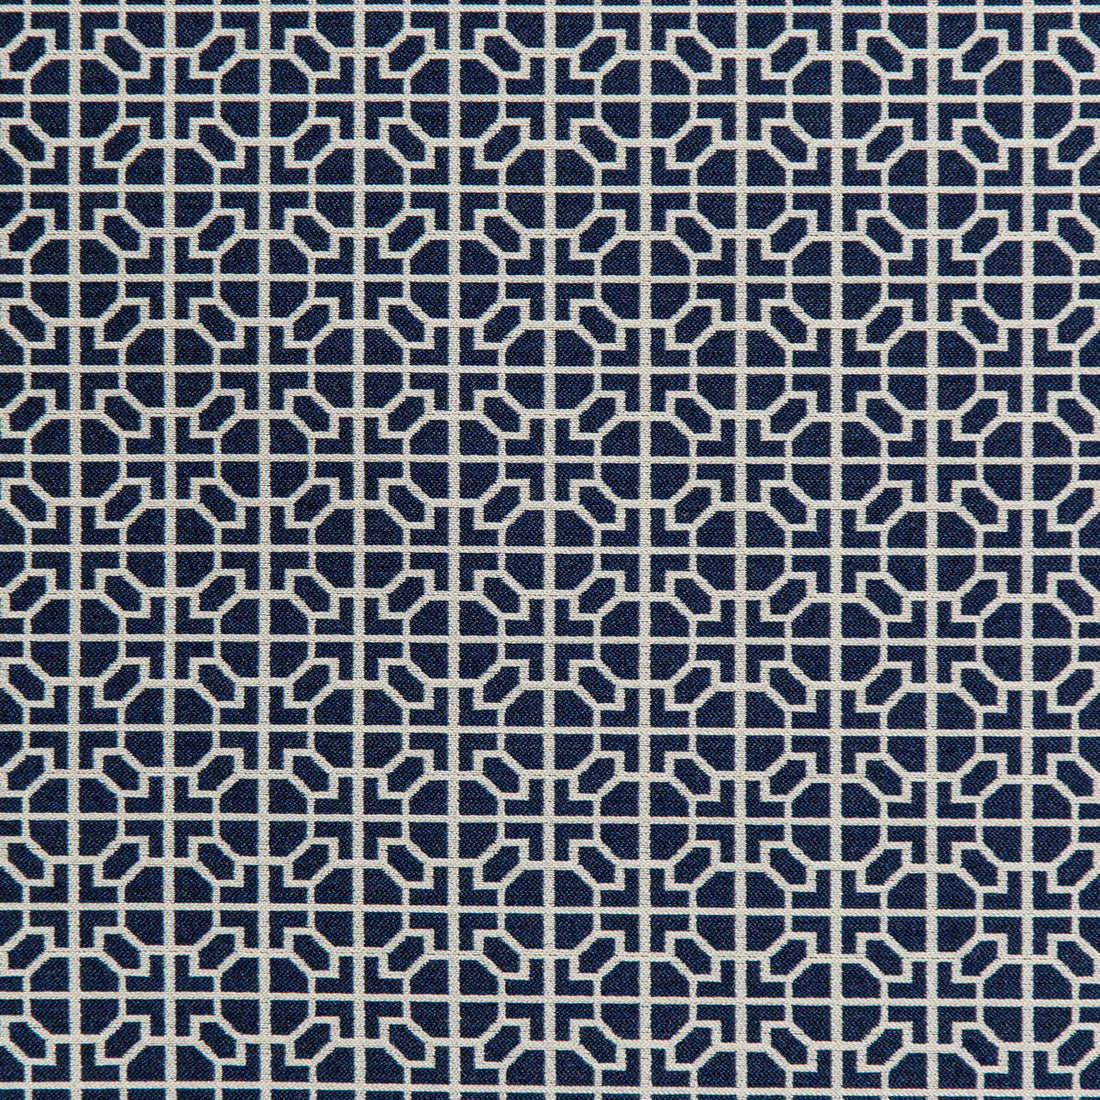 Raia fabric in navy color - pattern 35820.50.0 - by Kravet Design in the Indoor / Outdoor collection